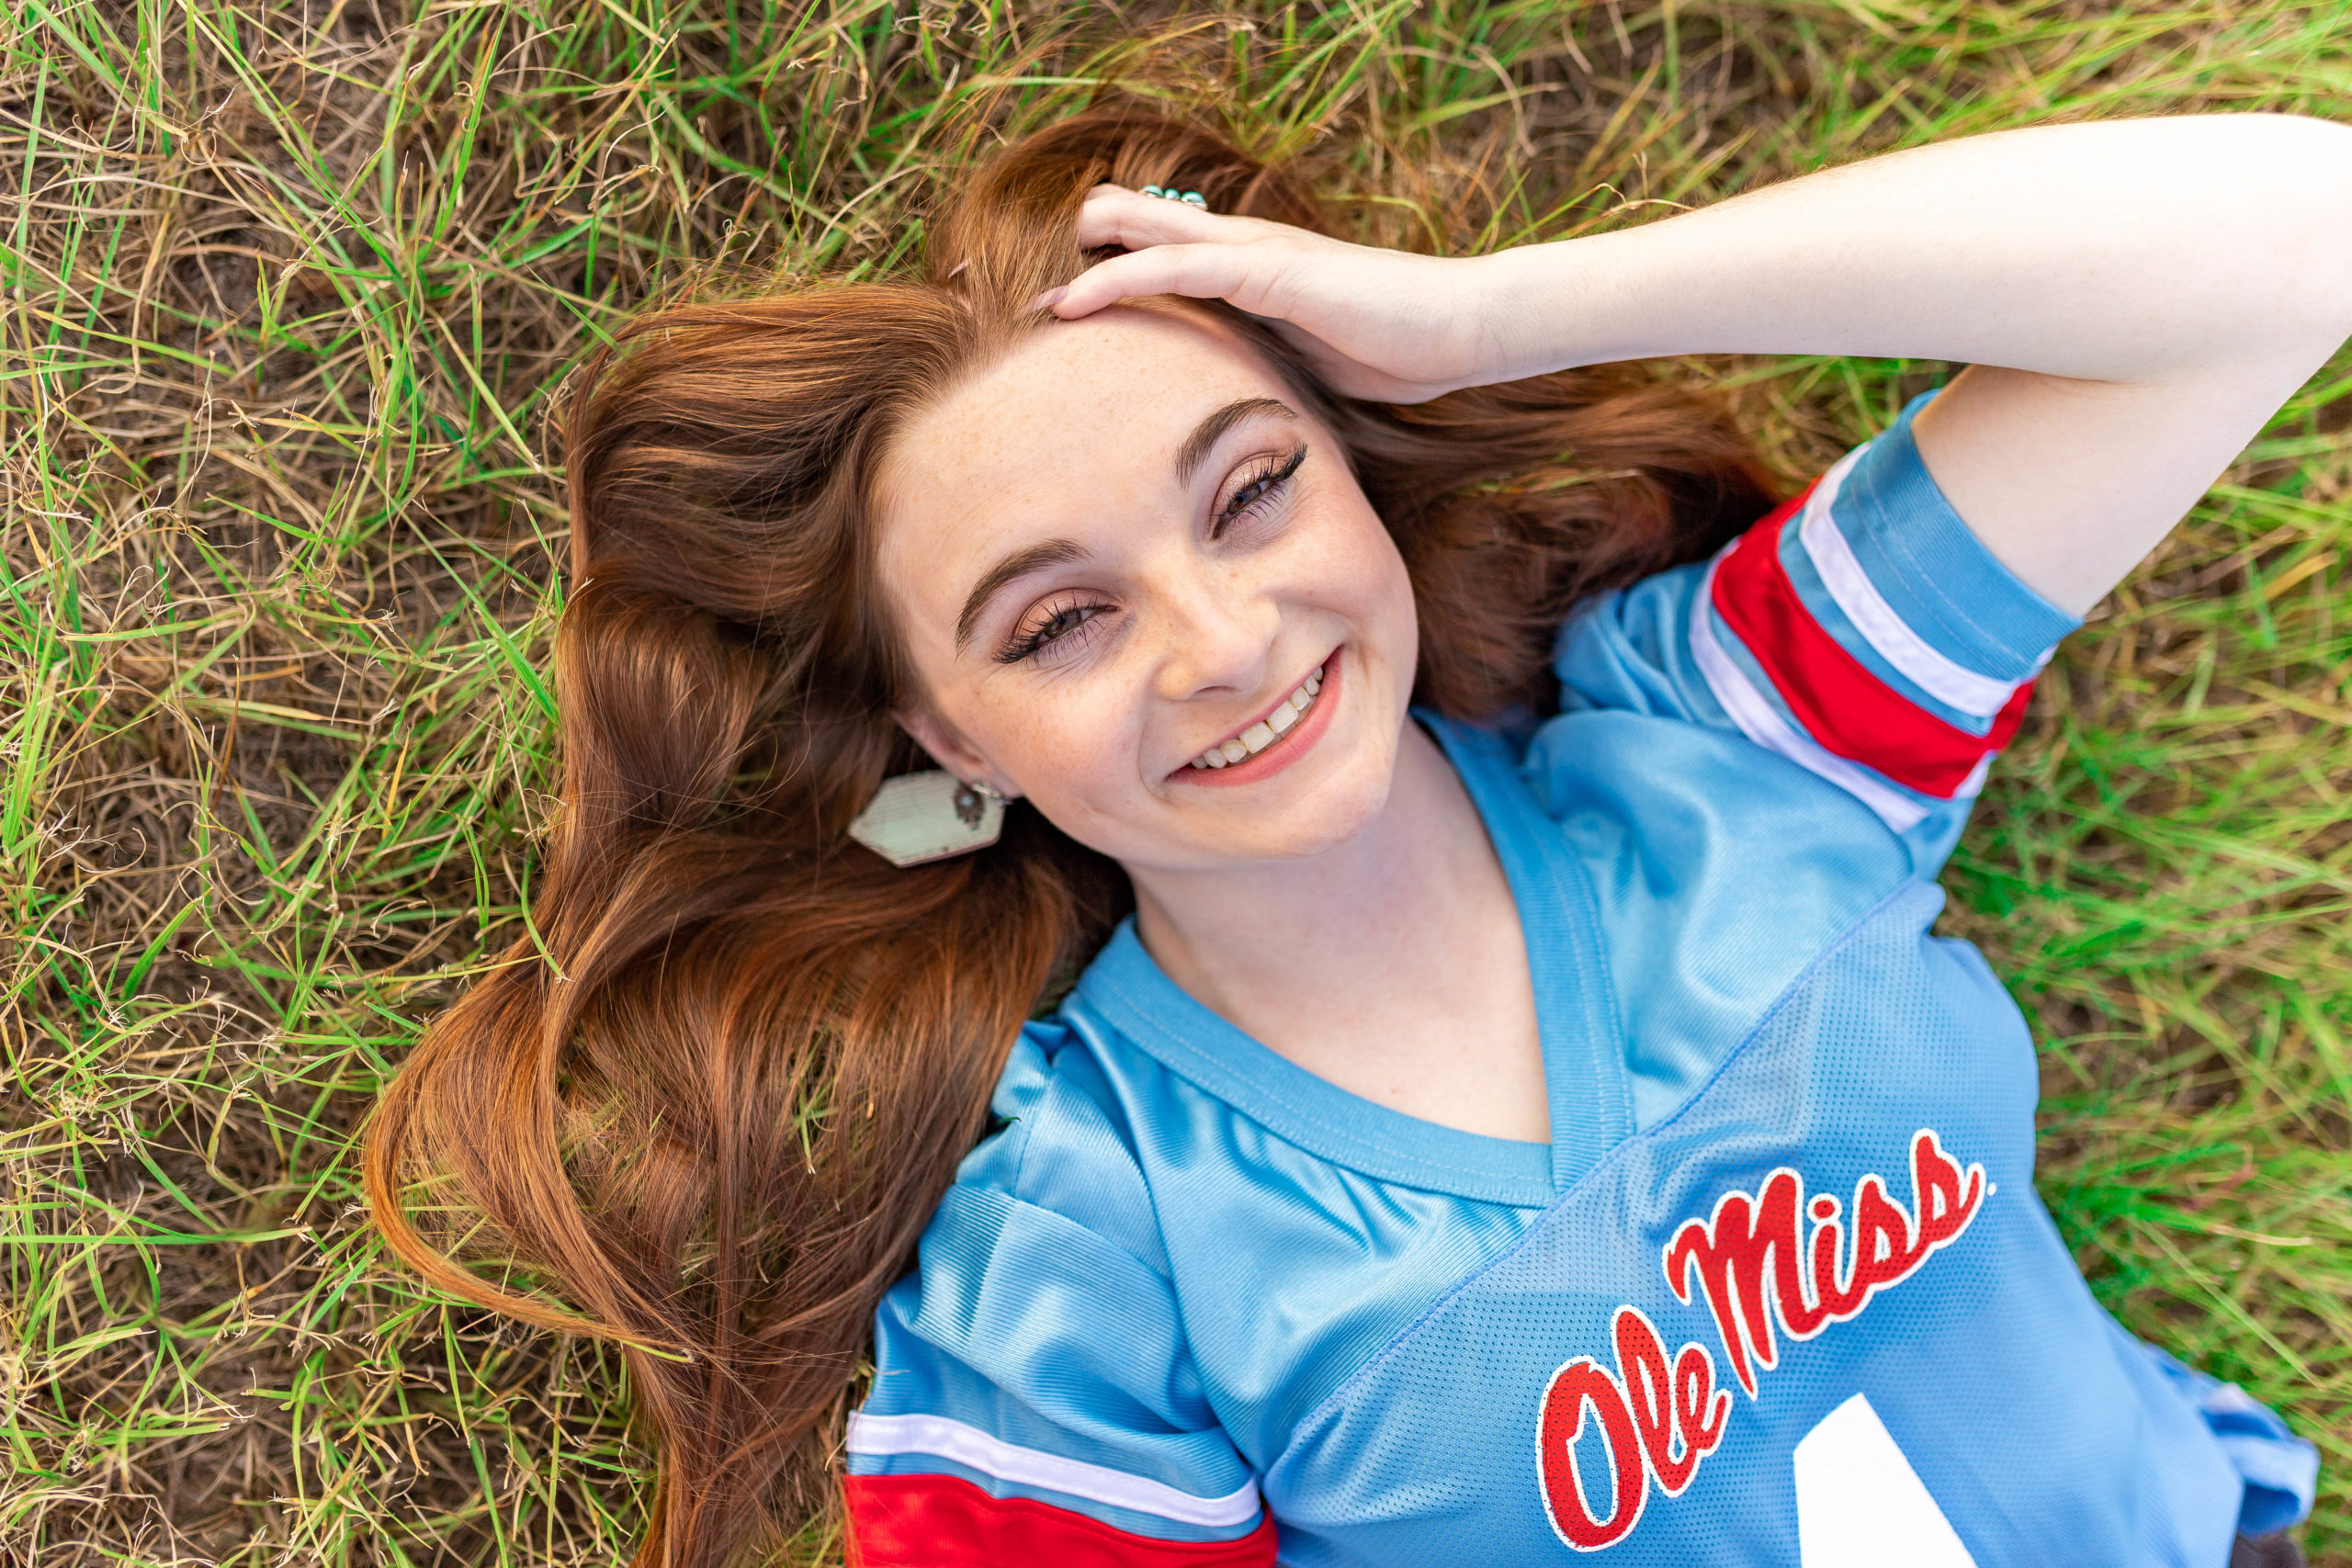 Mississippi senior posing with hand in hair